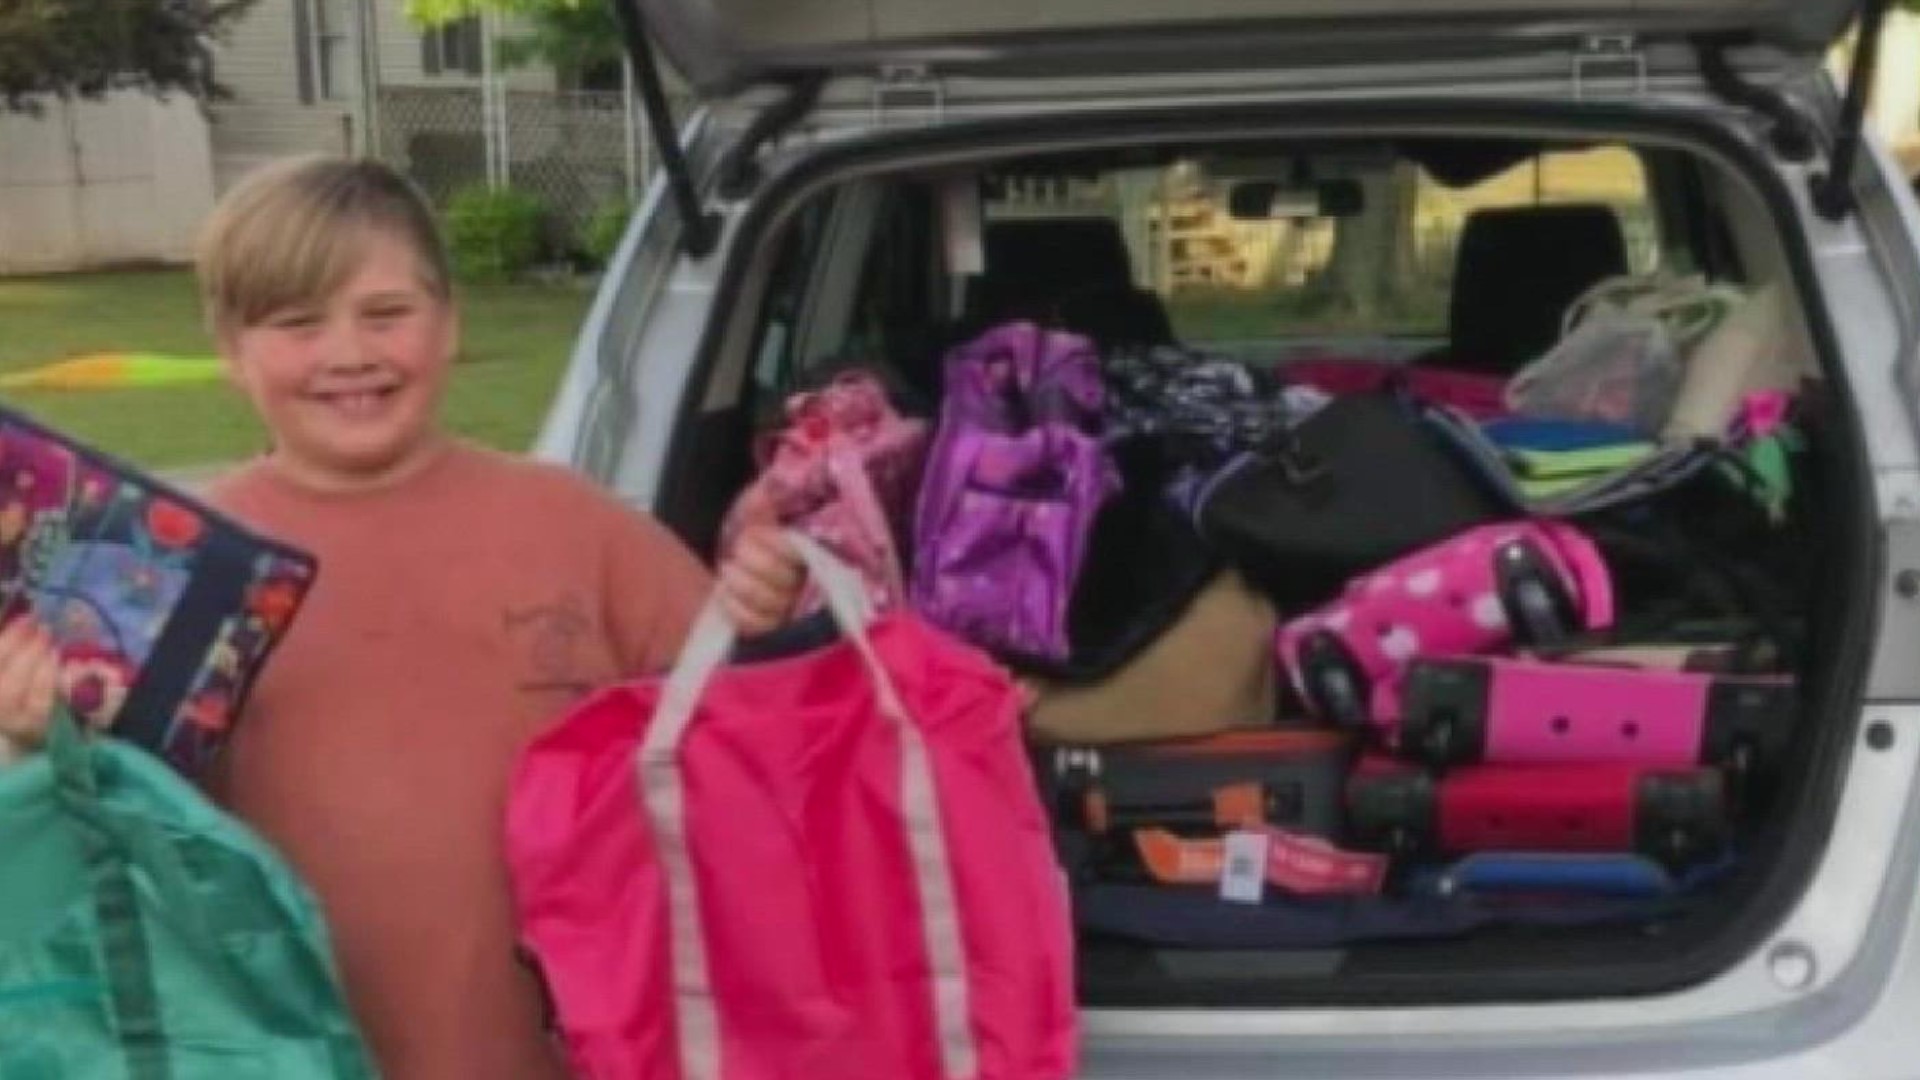 The 11-year-old Heidelberg Township boy spent two years collecting around 200 bags to give to children in the foster care system.